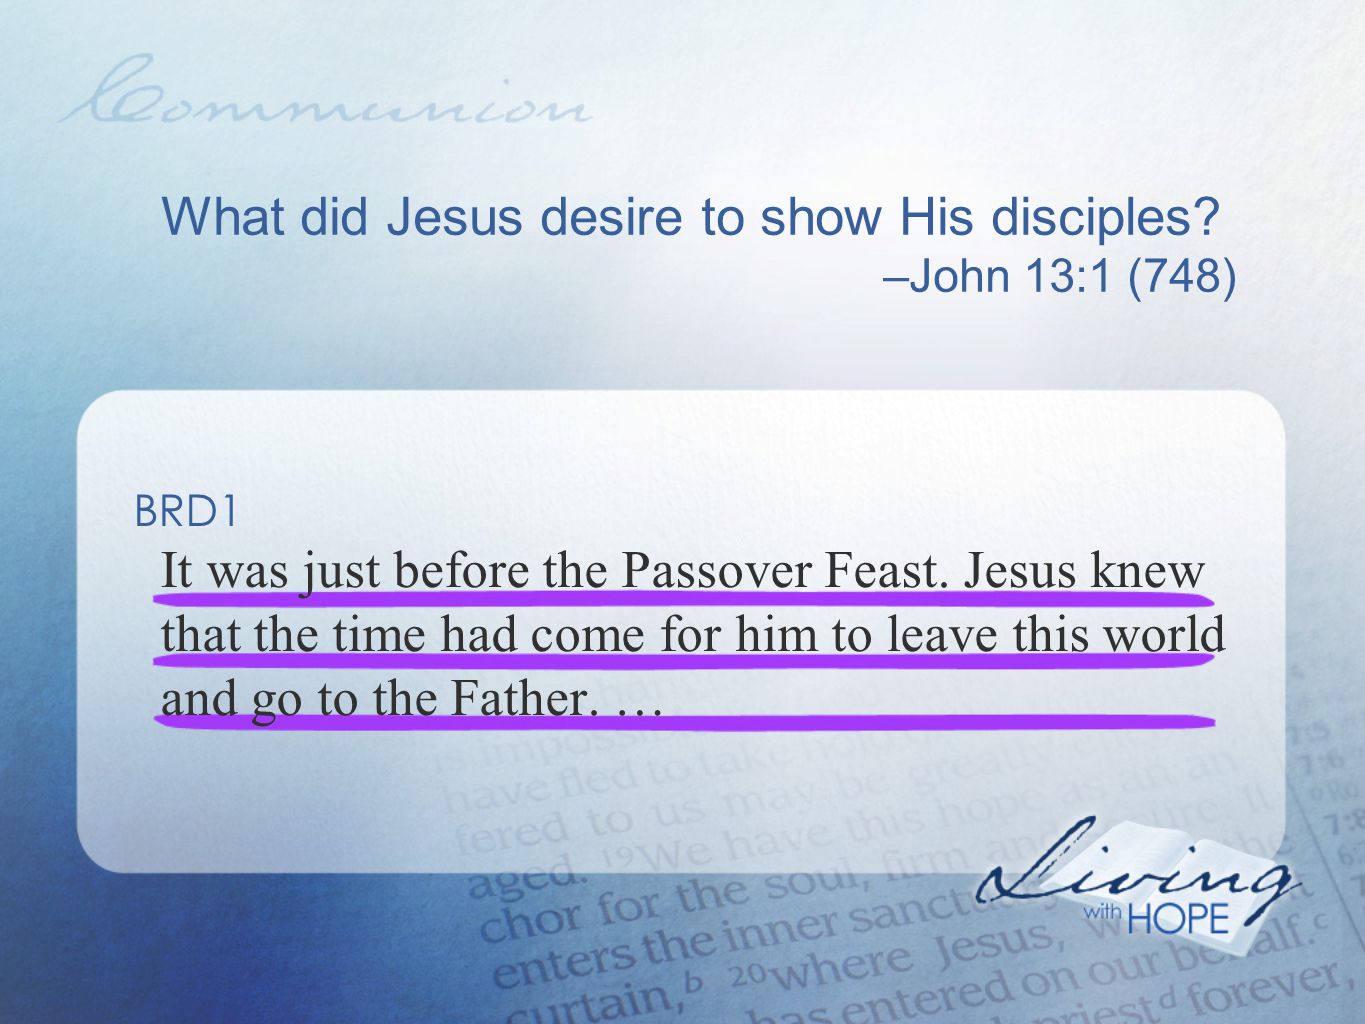 What did Jesus desire to show His disciples